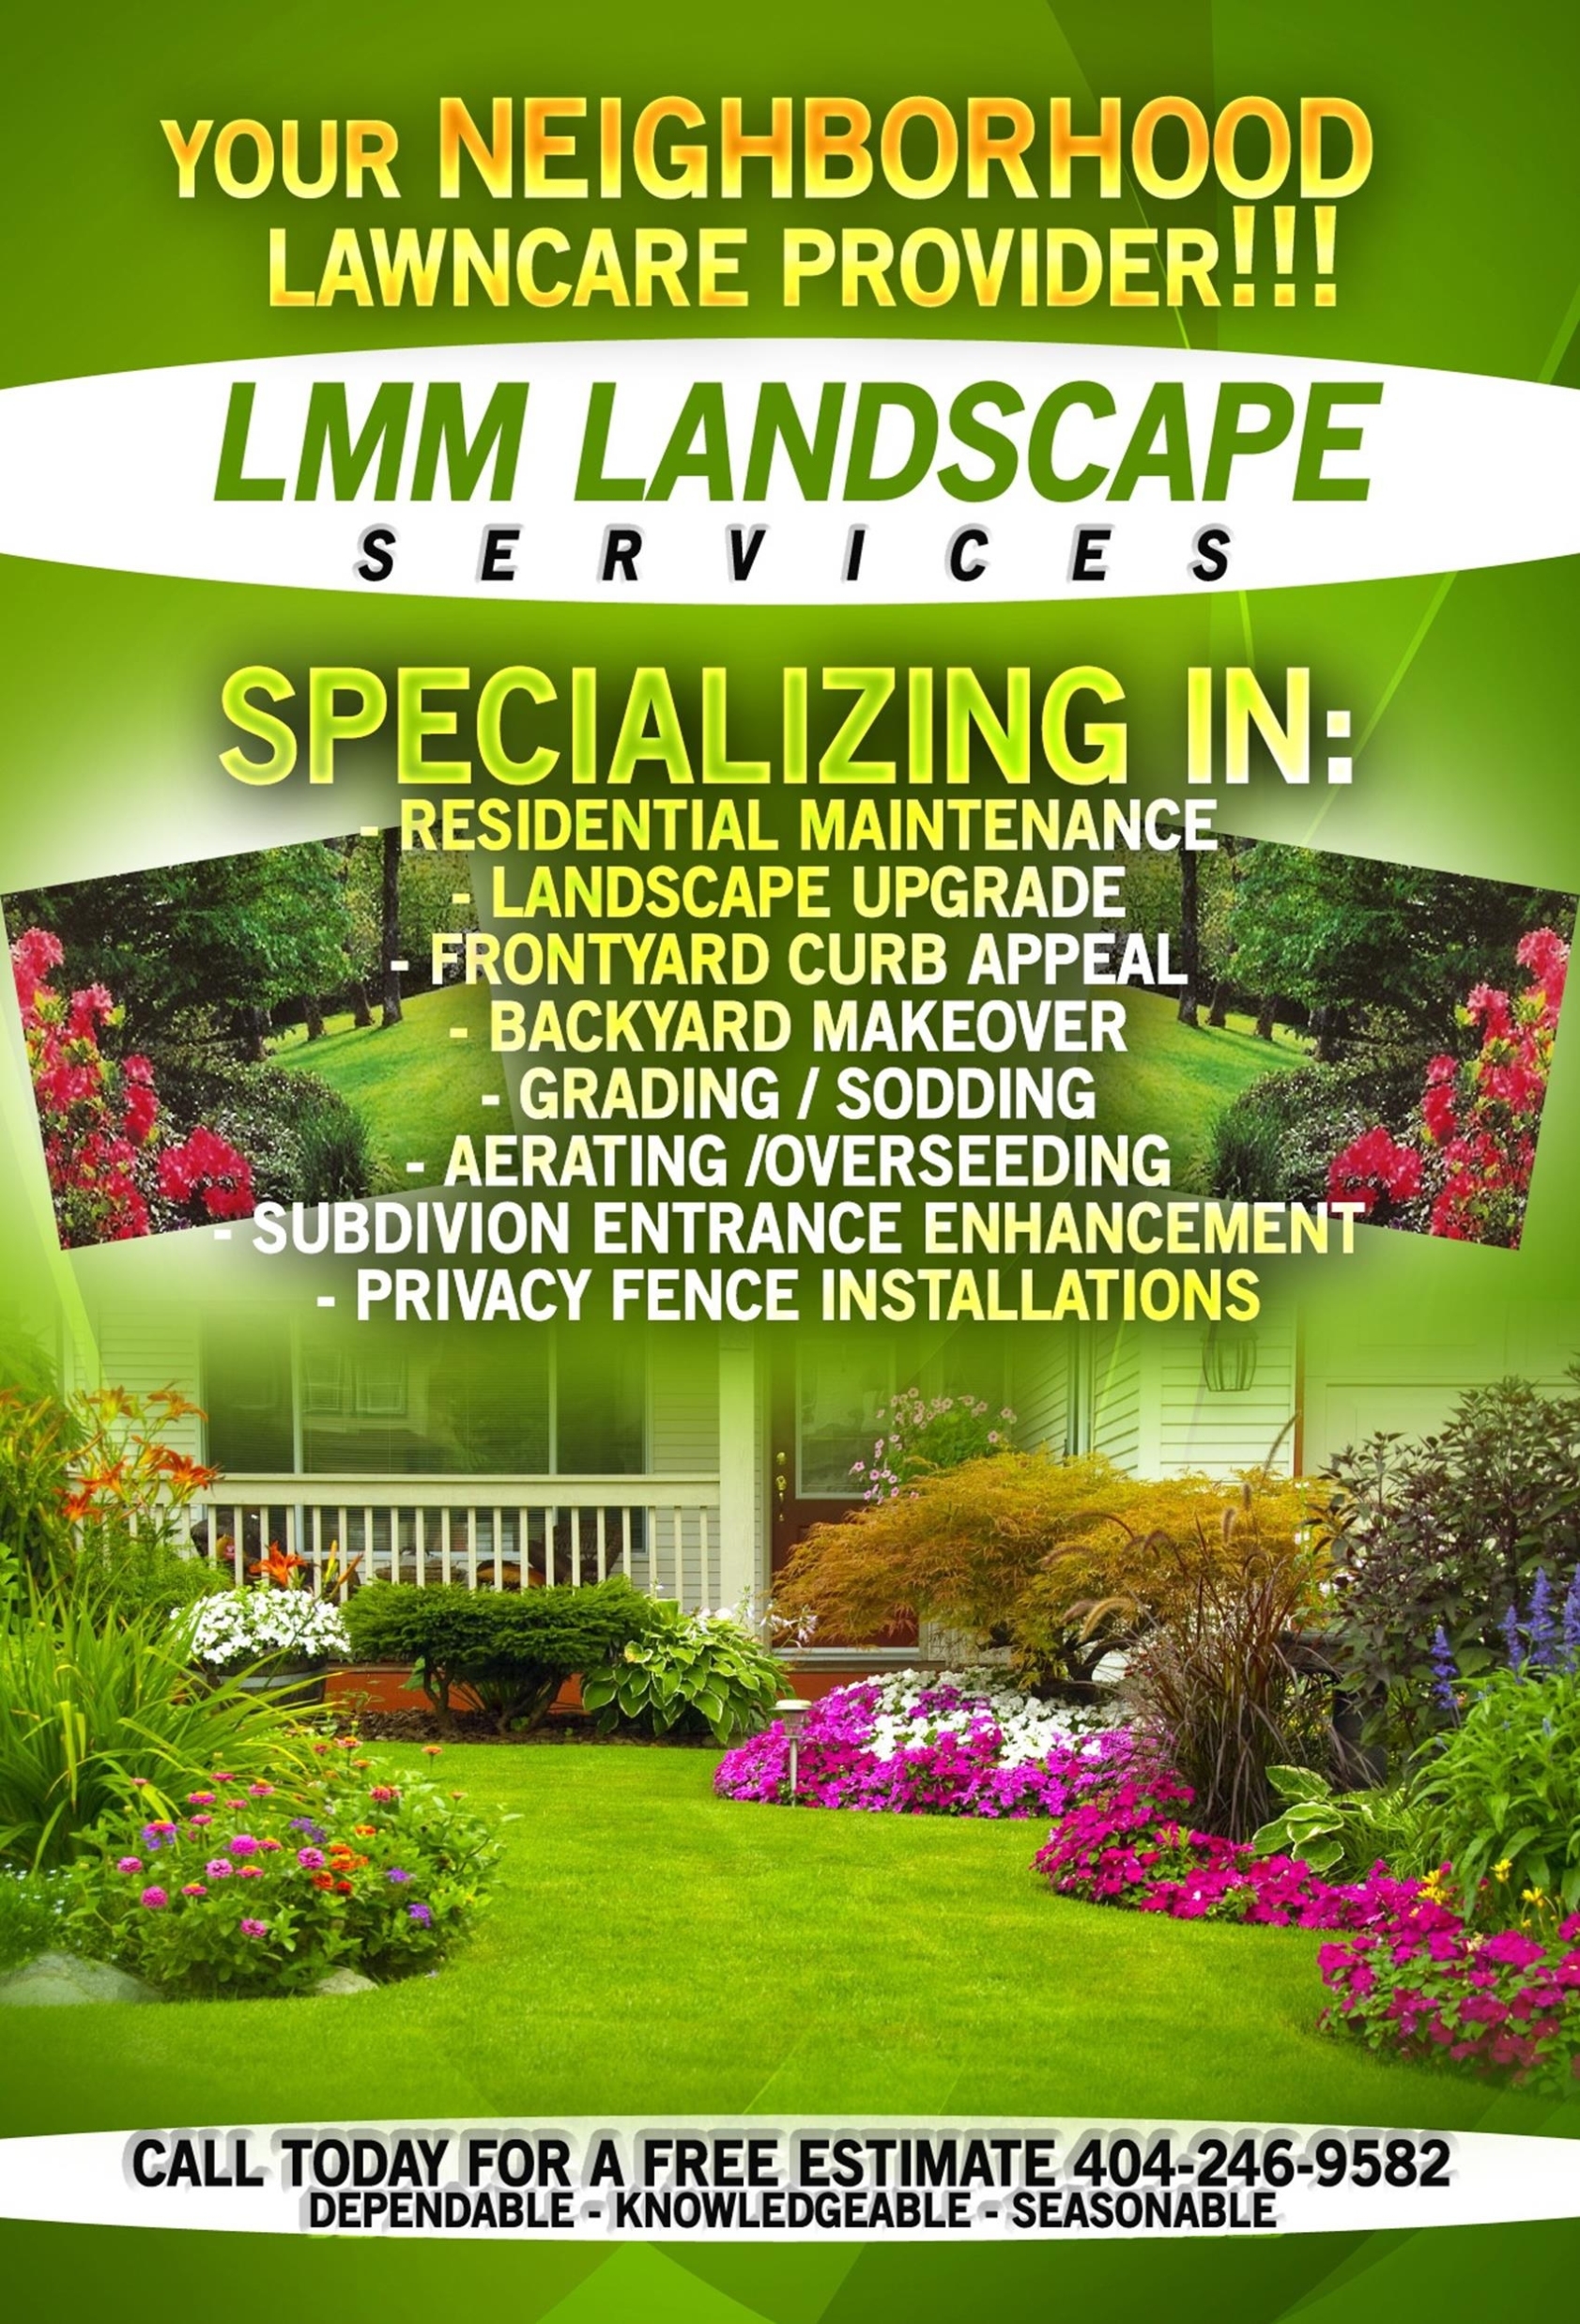 30 Free Lawn Care Flyer Templates [Lawn Mower Flyers] ᐅ Templatelab inside Free Ad Flyer Templates